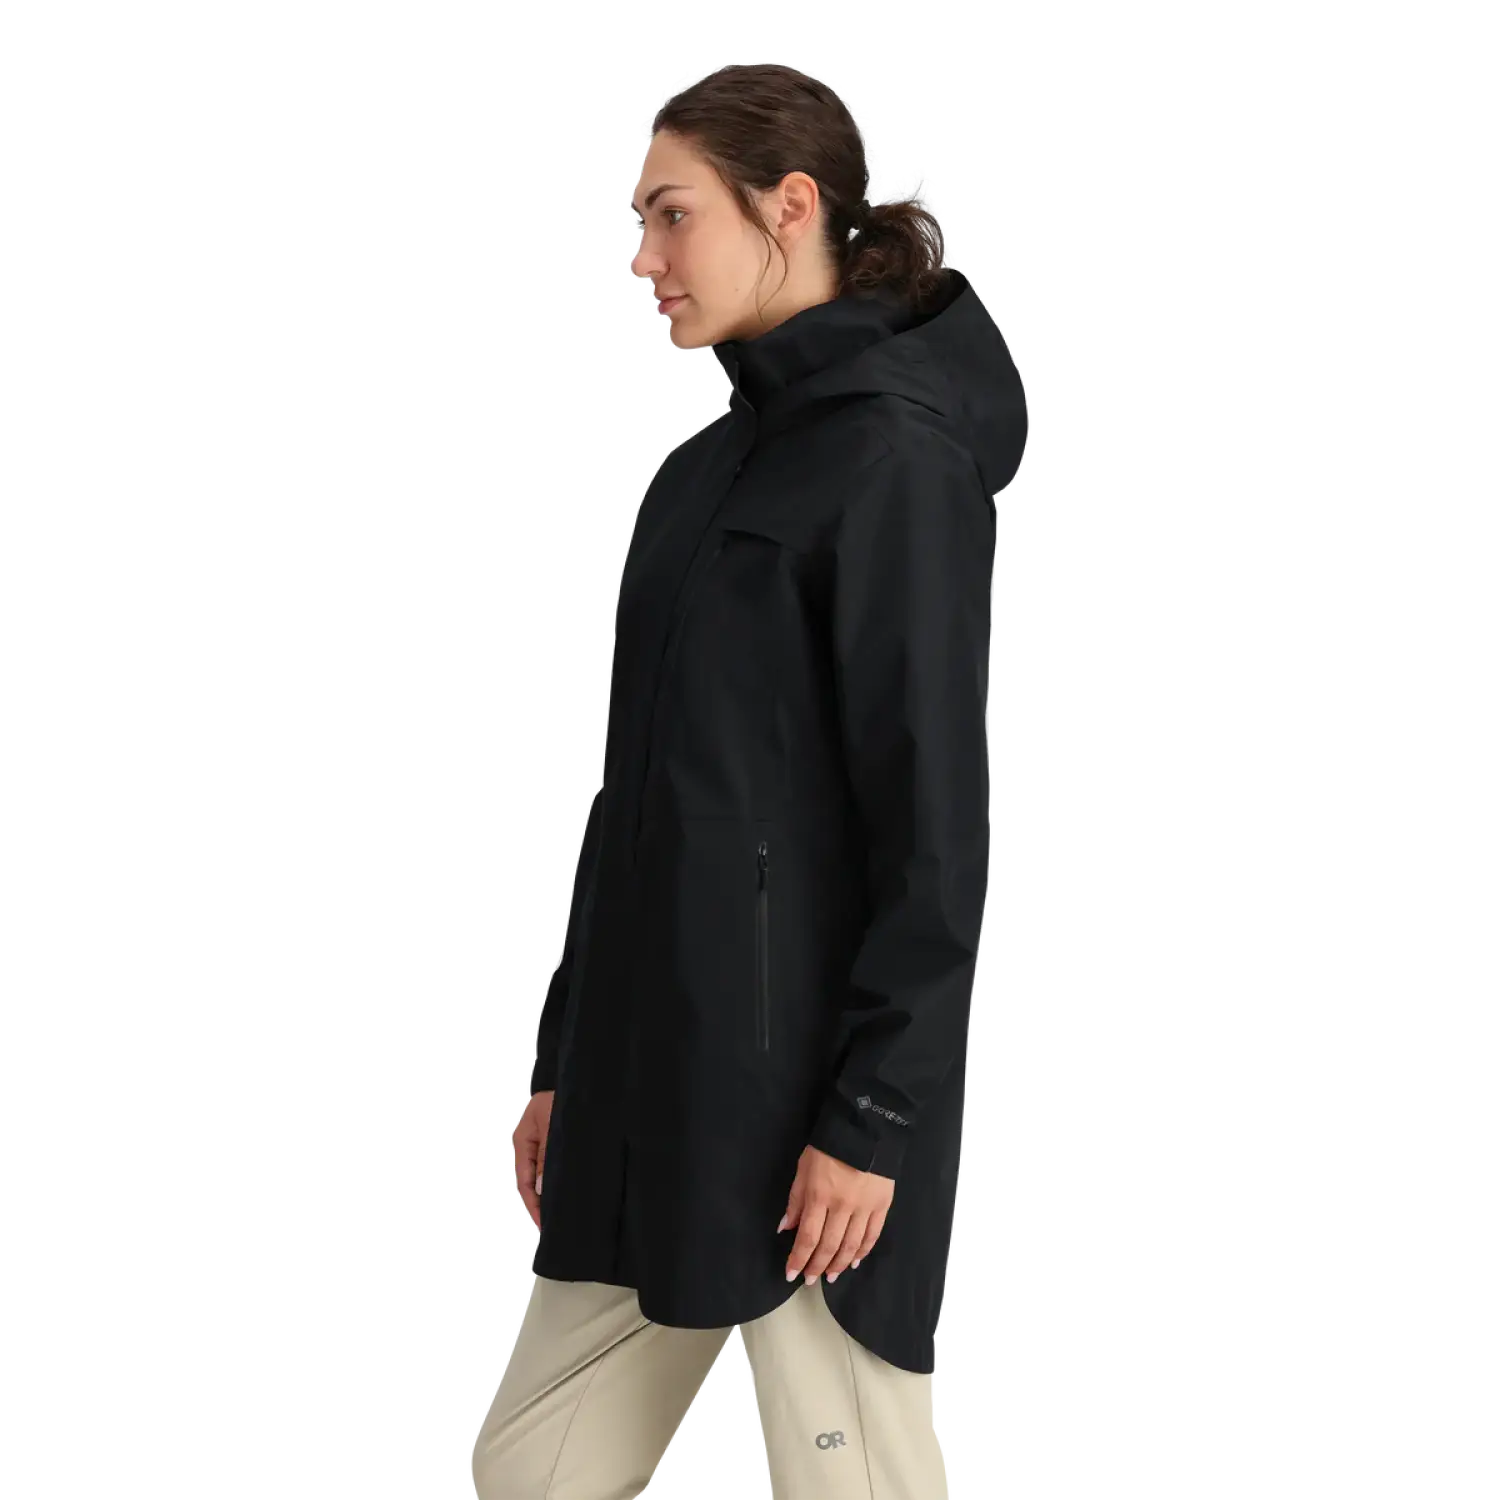 Outdoor Research Women's Aspire GORE-TEX® Trench shown in the Black color option. Side view.